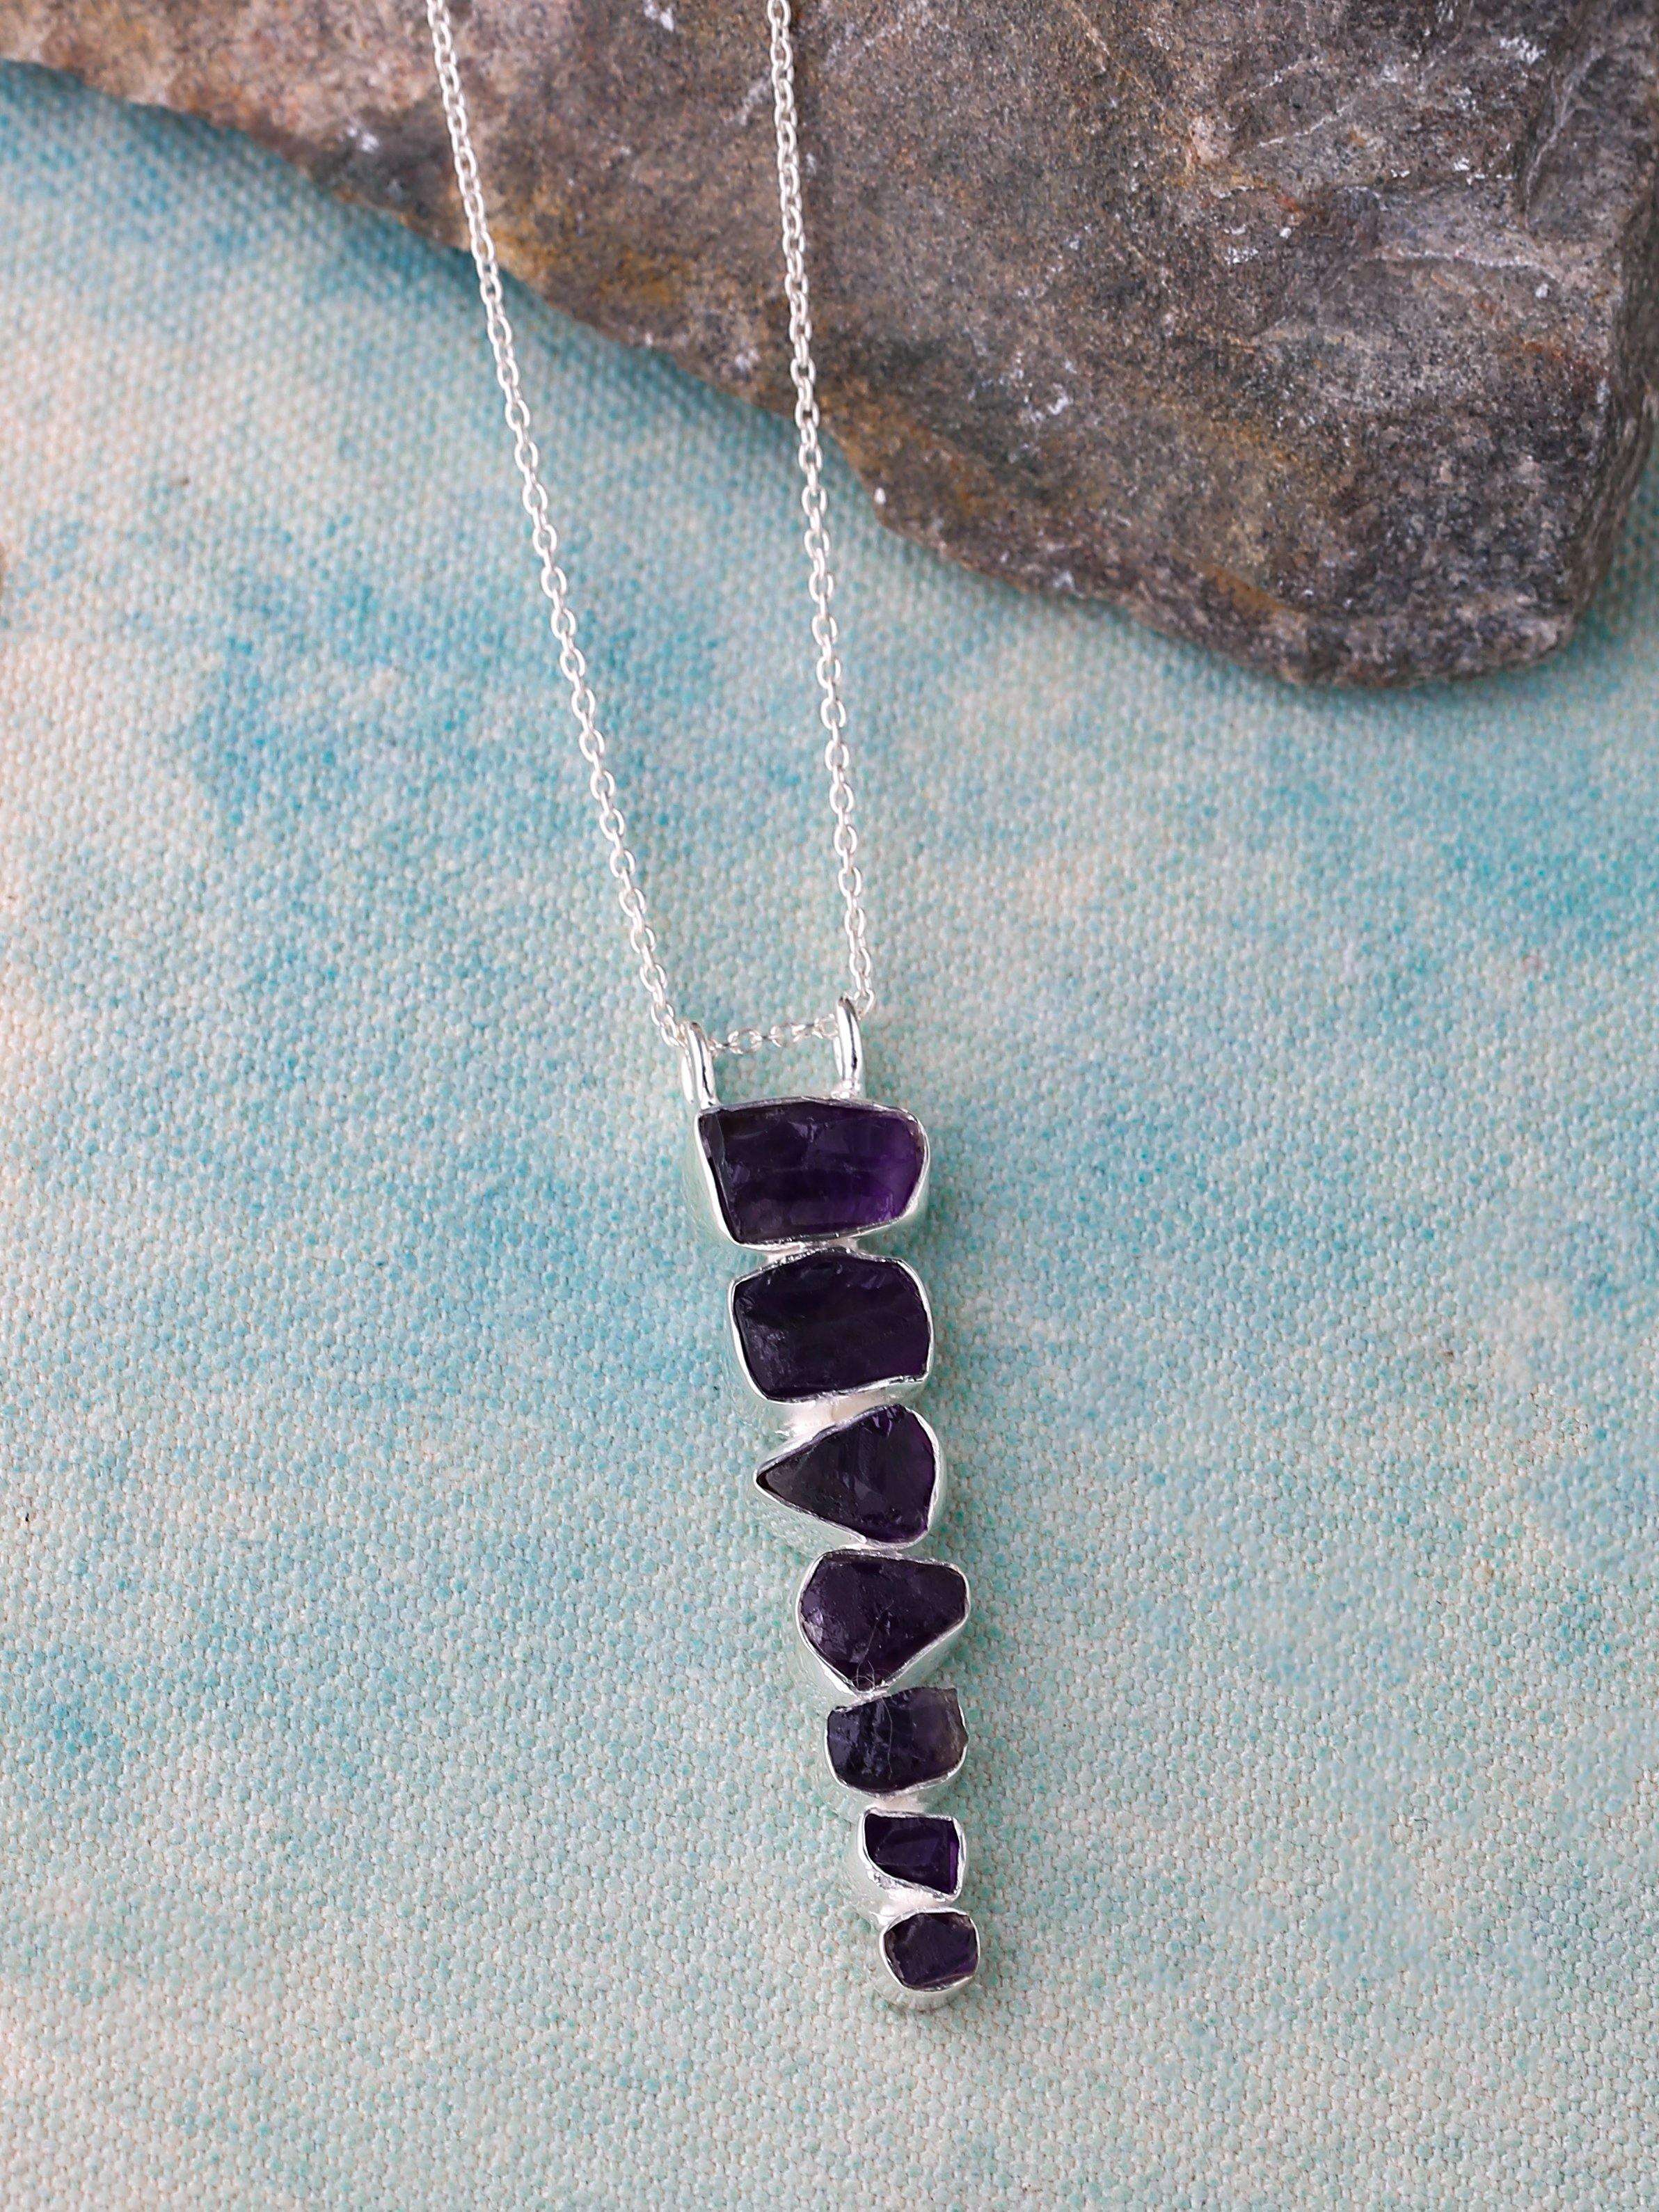 Natural Rough Amethyst Solid 925 Sterling Silver Long Pendant with 18 Inch Chain Necklace Jewelry - YoTreasure